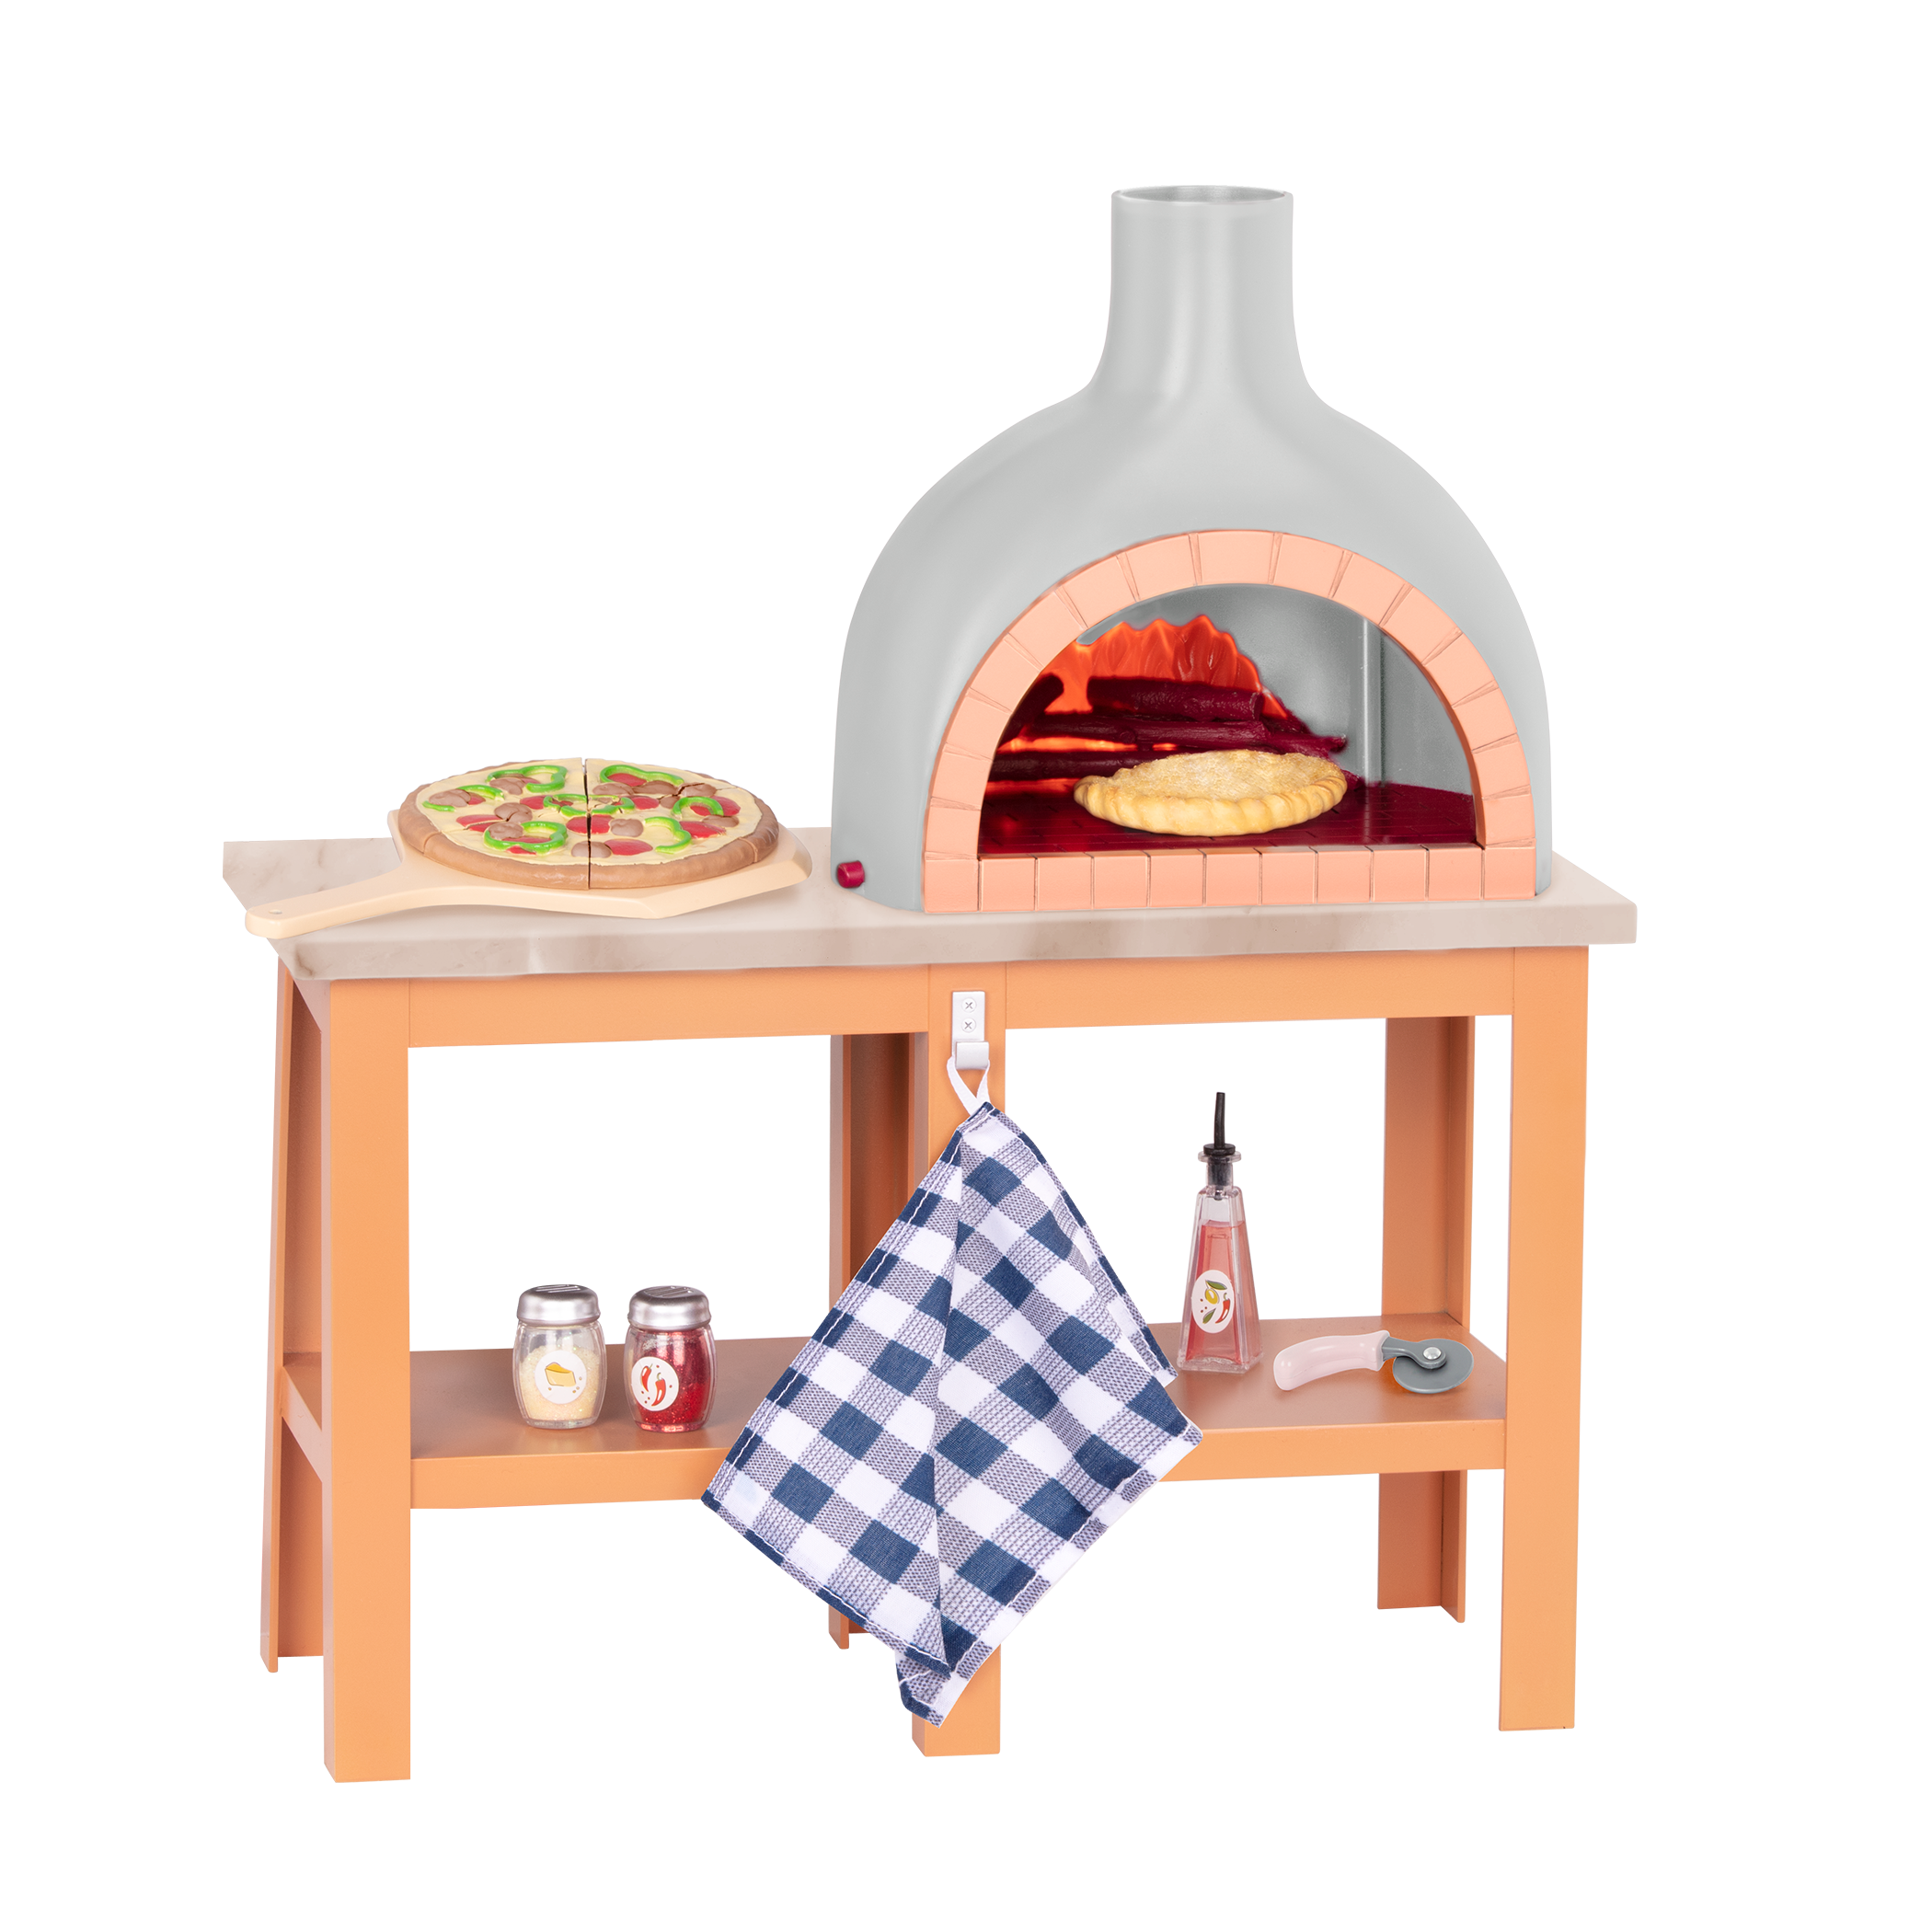 OG Pizza Oven Playset - Forno